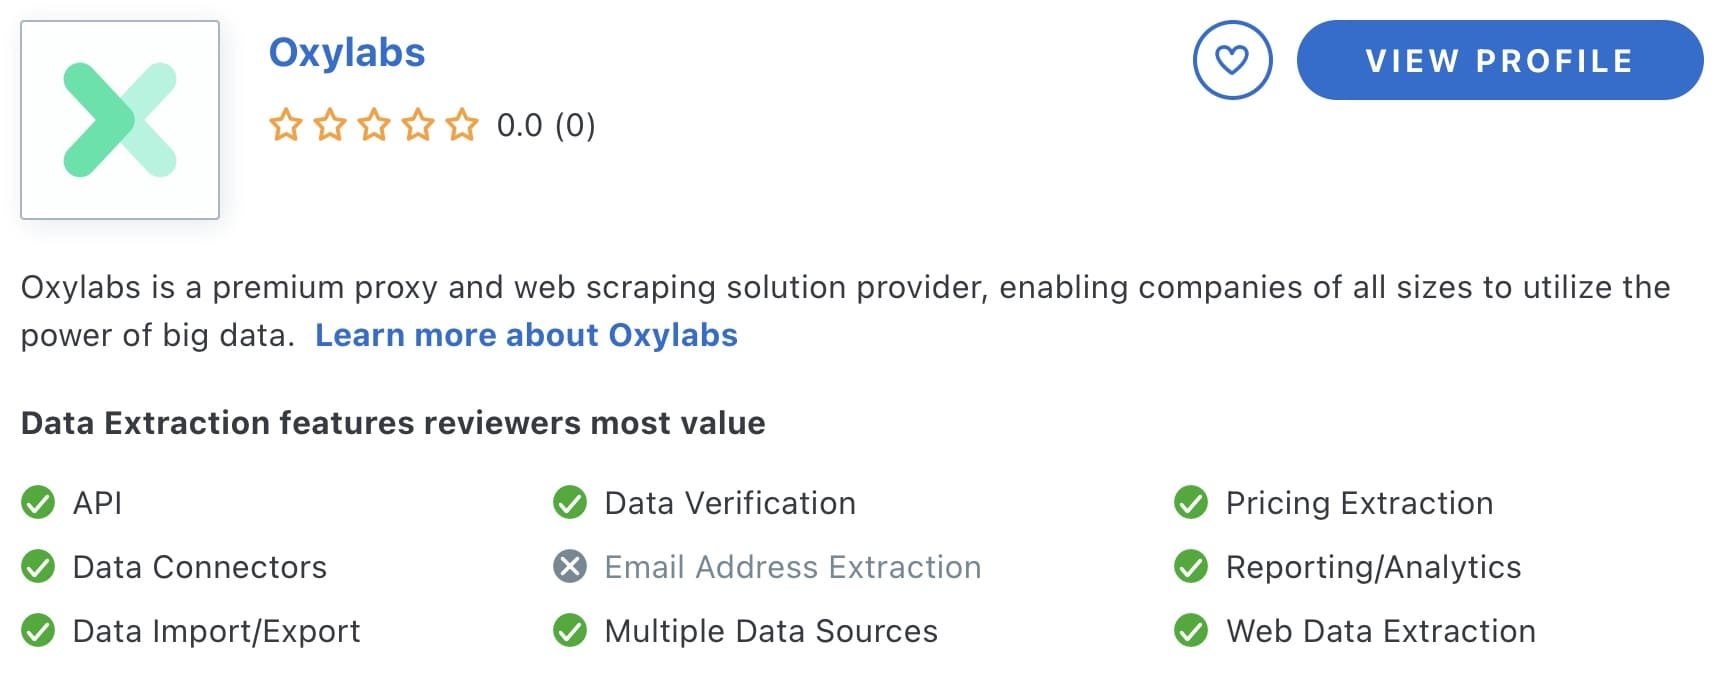 Oxylabs on Capterra